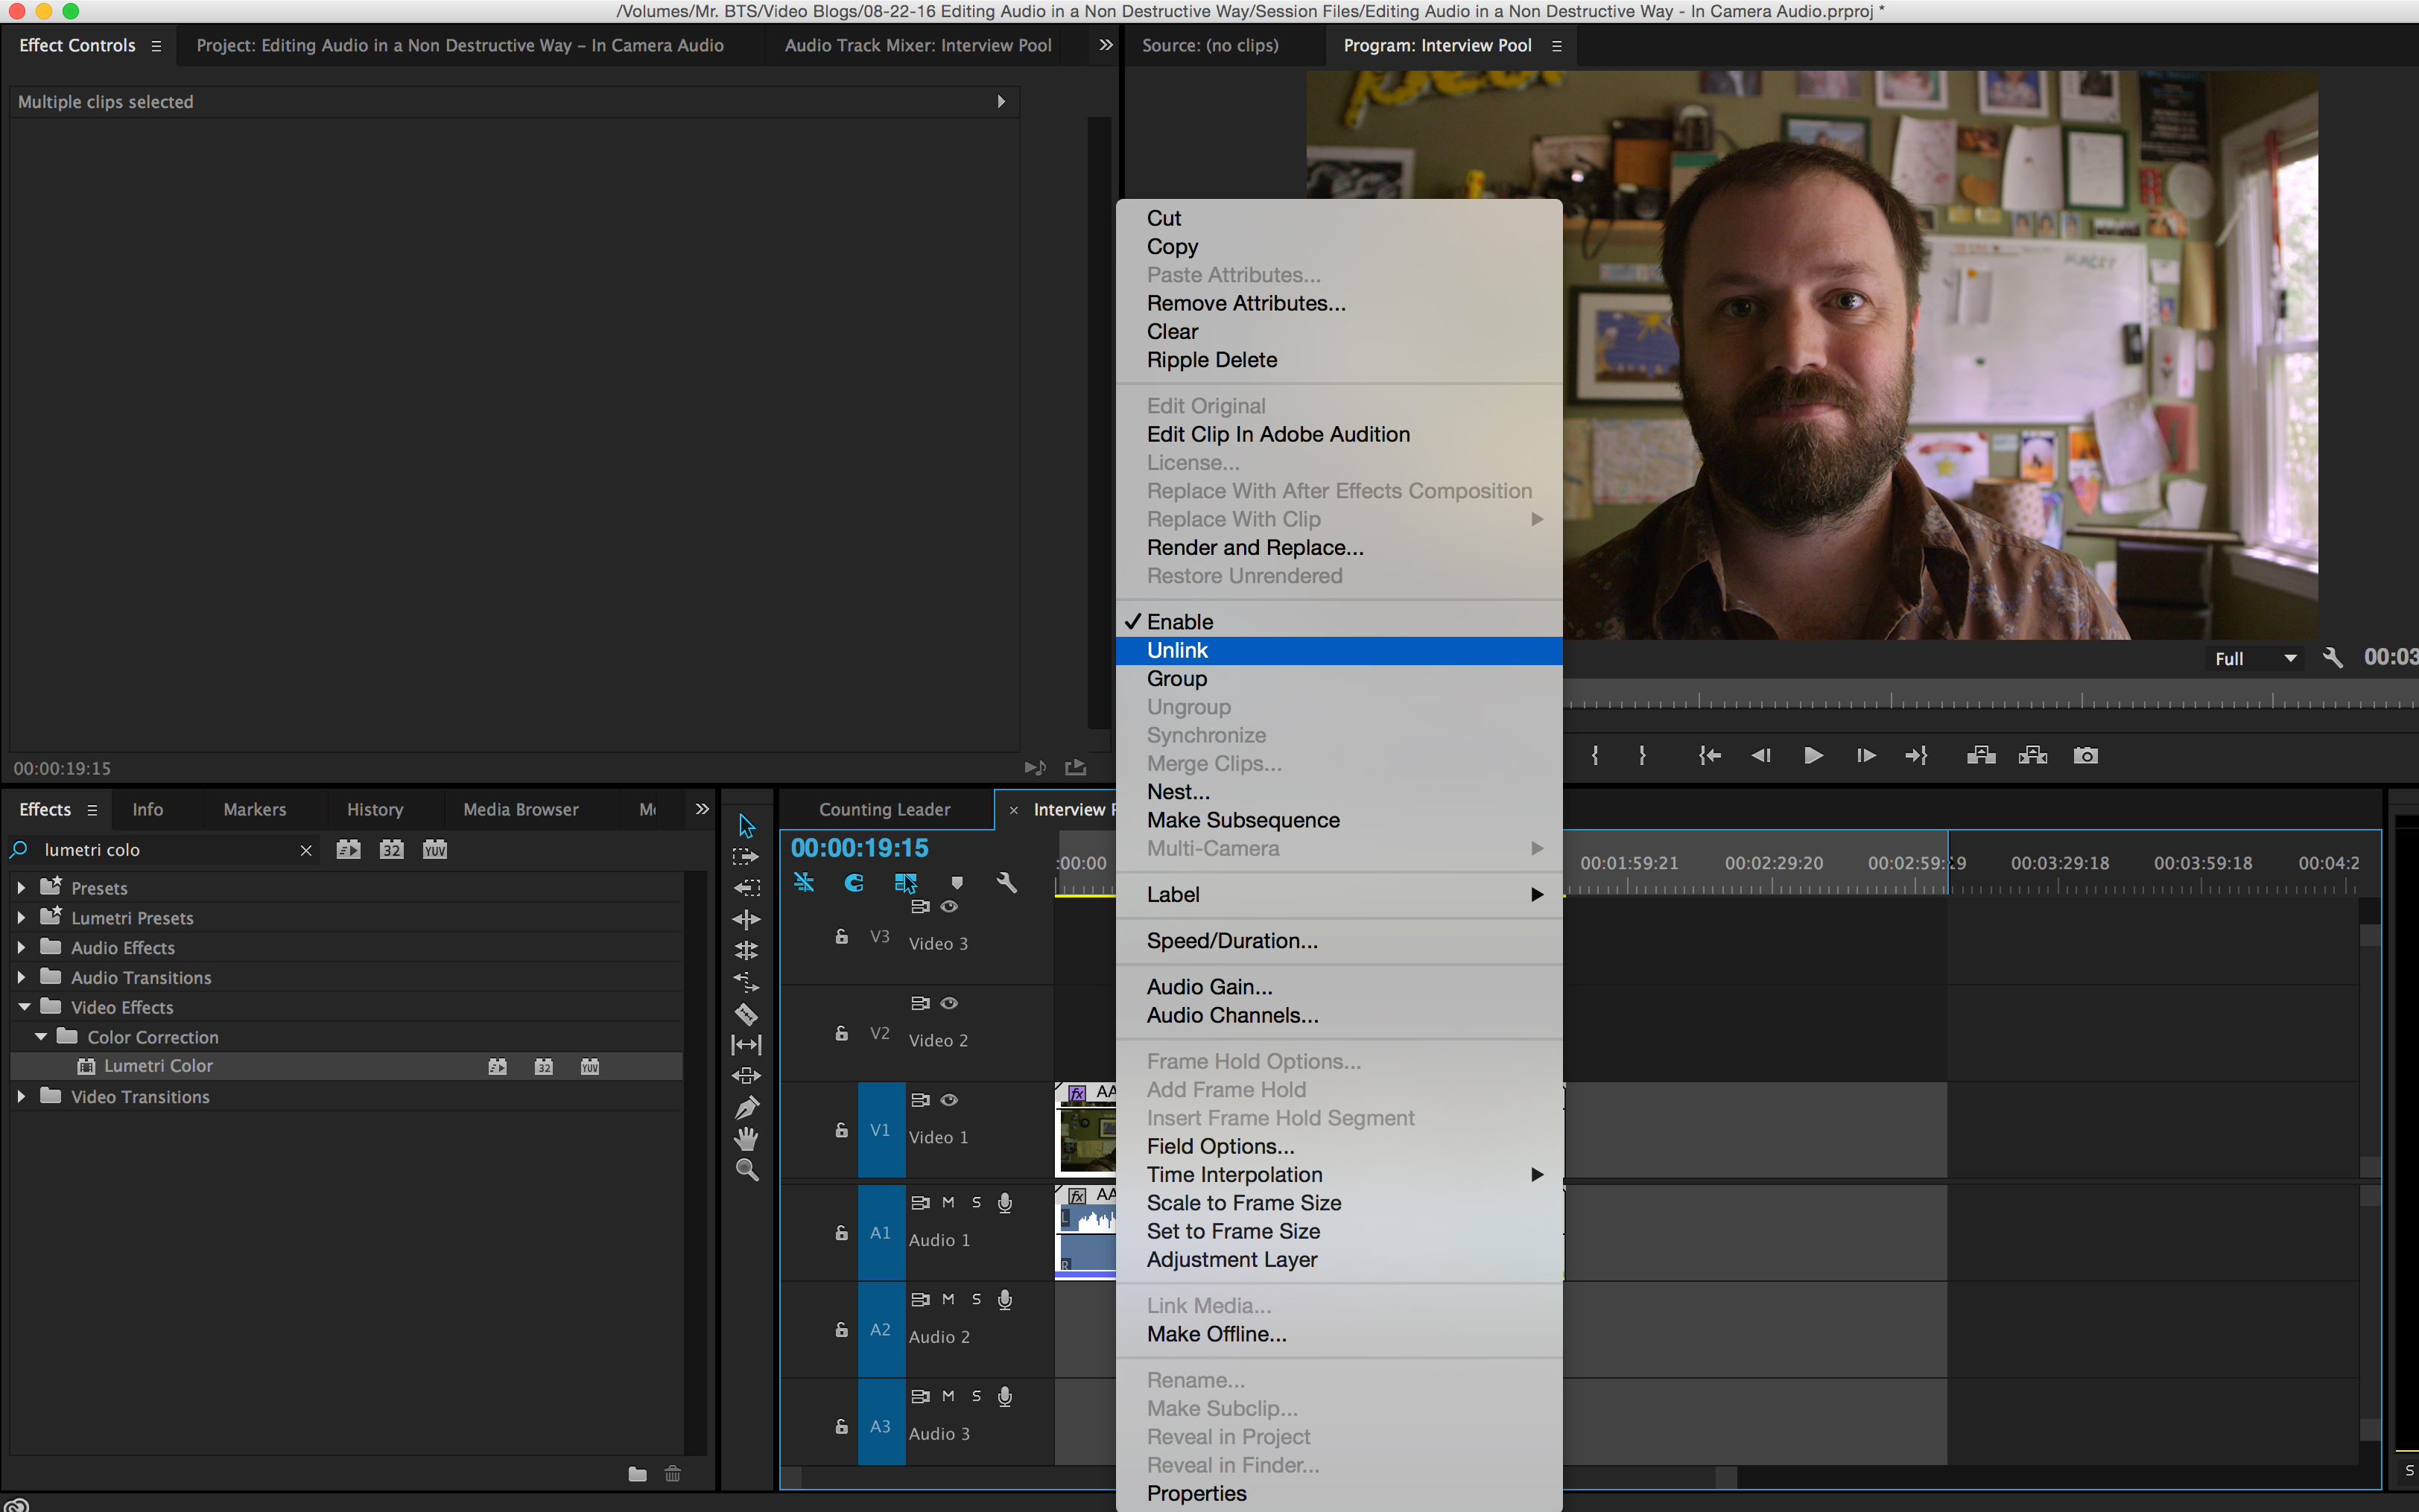 How to Simultaneously Edit Multiple Internal Camera Audio Files: Unlink Audio